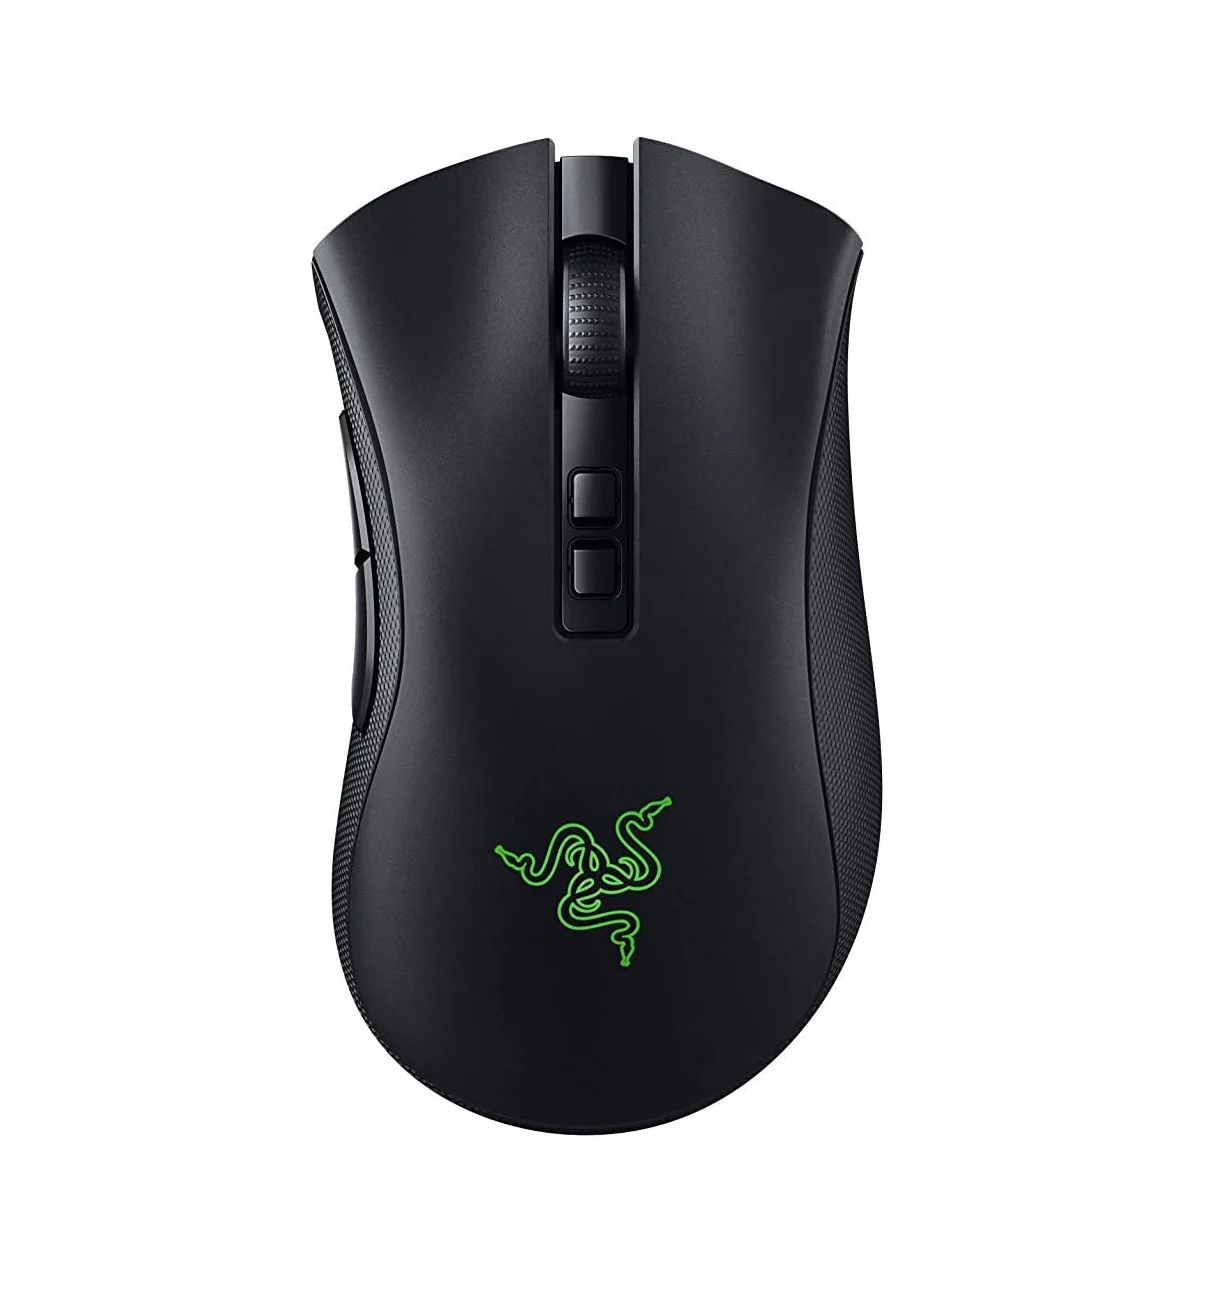 

Razer Deathadder V2 Pro Gaming Wireless Mouse 20000DPI 2.4Ghz Optical Programmable Buttons Gaming Mouse, Black